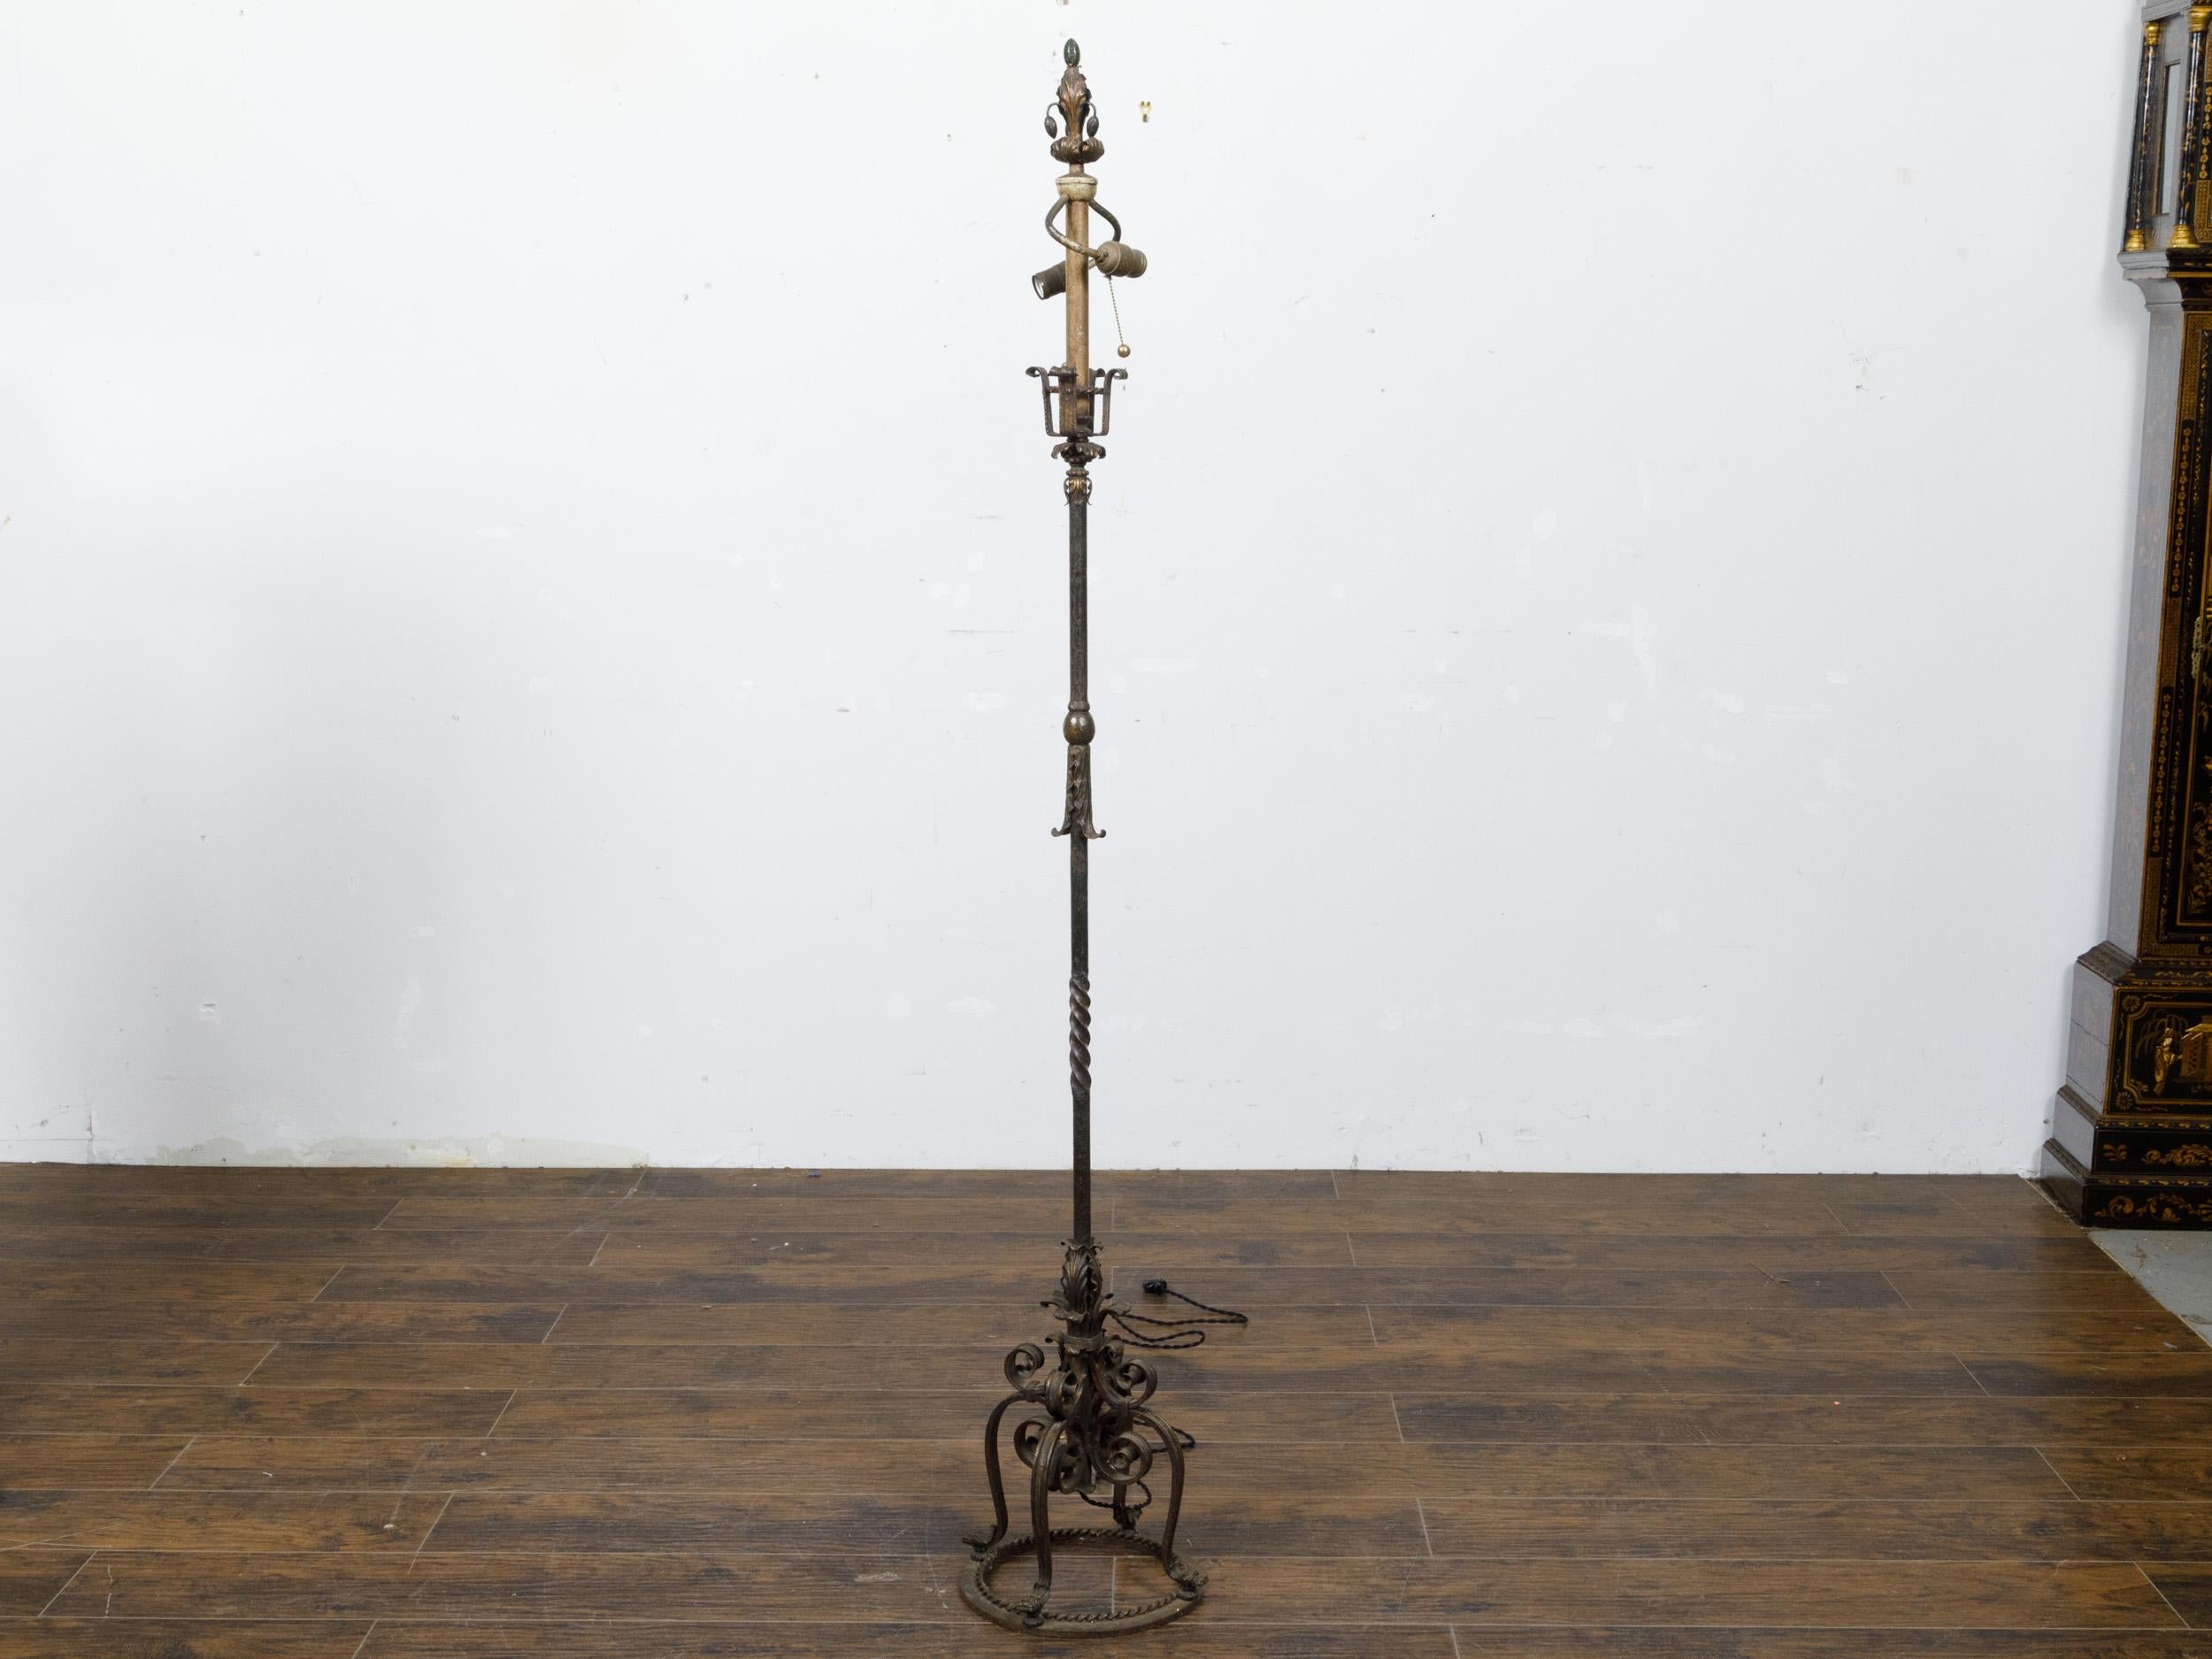 A French steel and brass floor lamp from circa 1930 with two light sockets, scrolling legs and foliage motifs. This French steel and brass floor lamp from circa 1930 is a testament to the elegance of early 20th-century design. Standing on a trio of